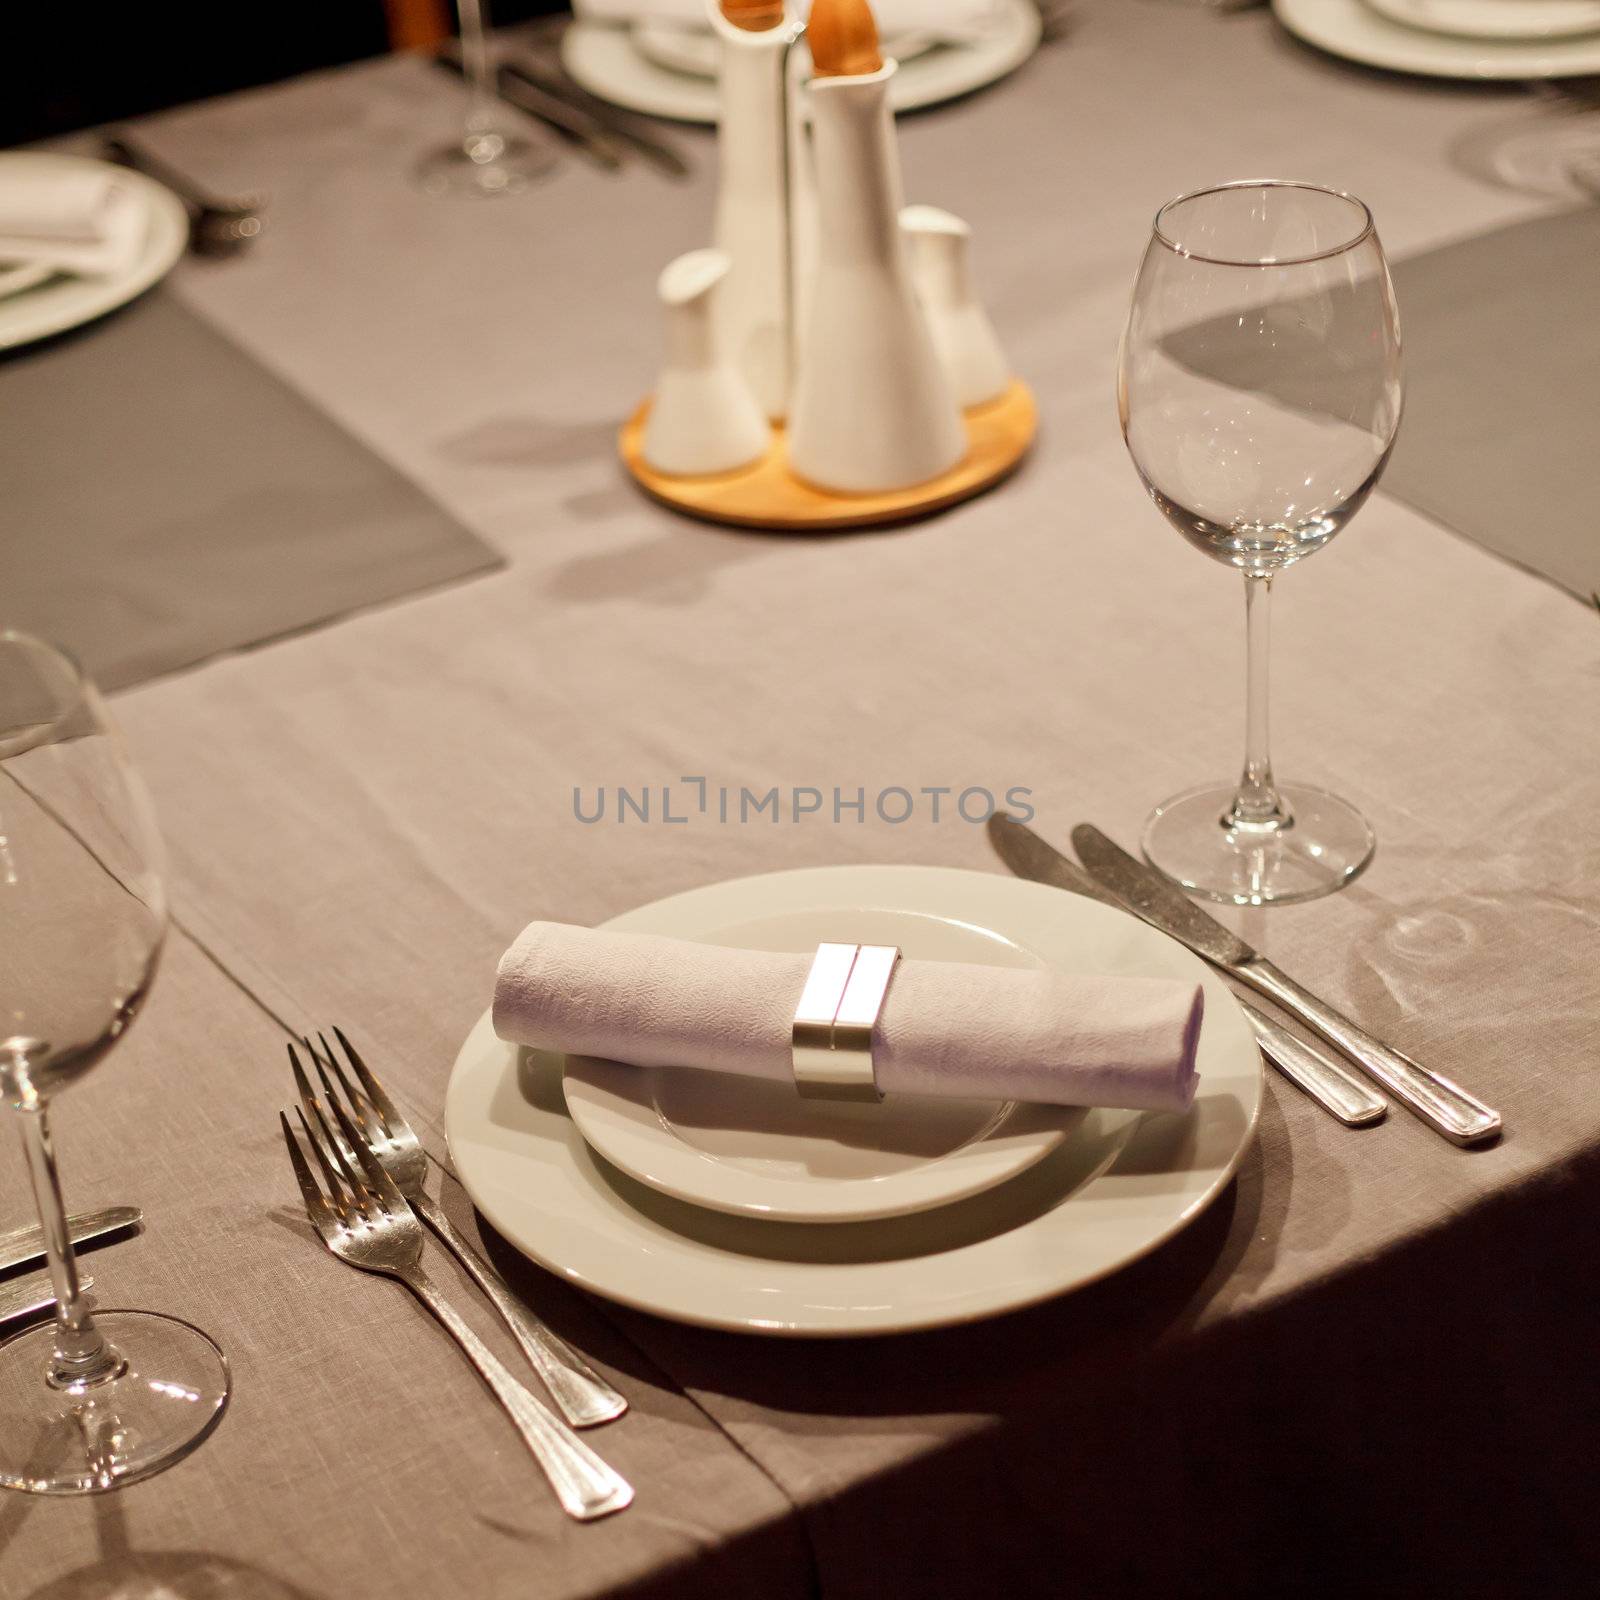 Tables set for meal by shebeko